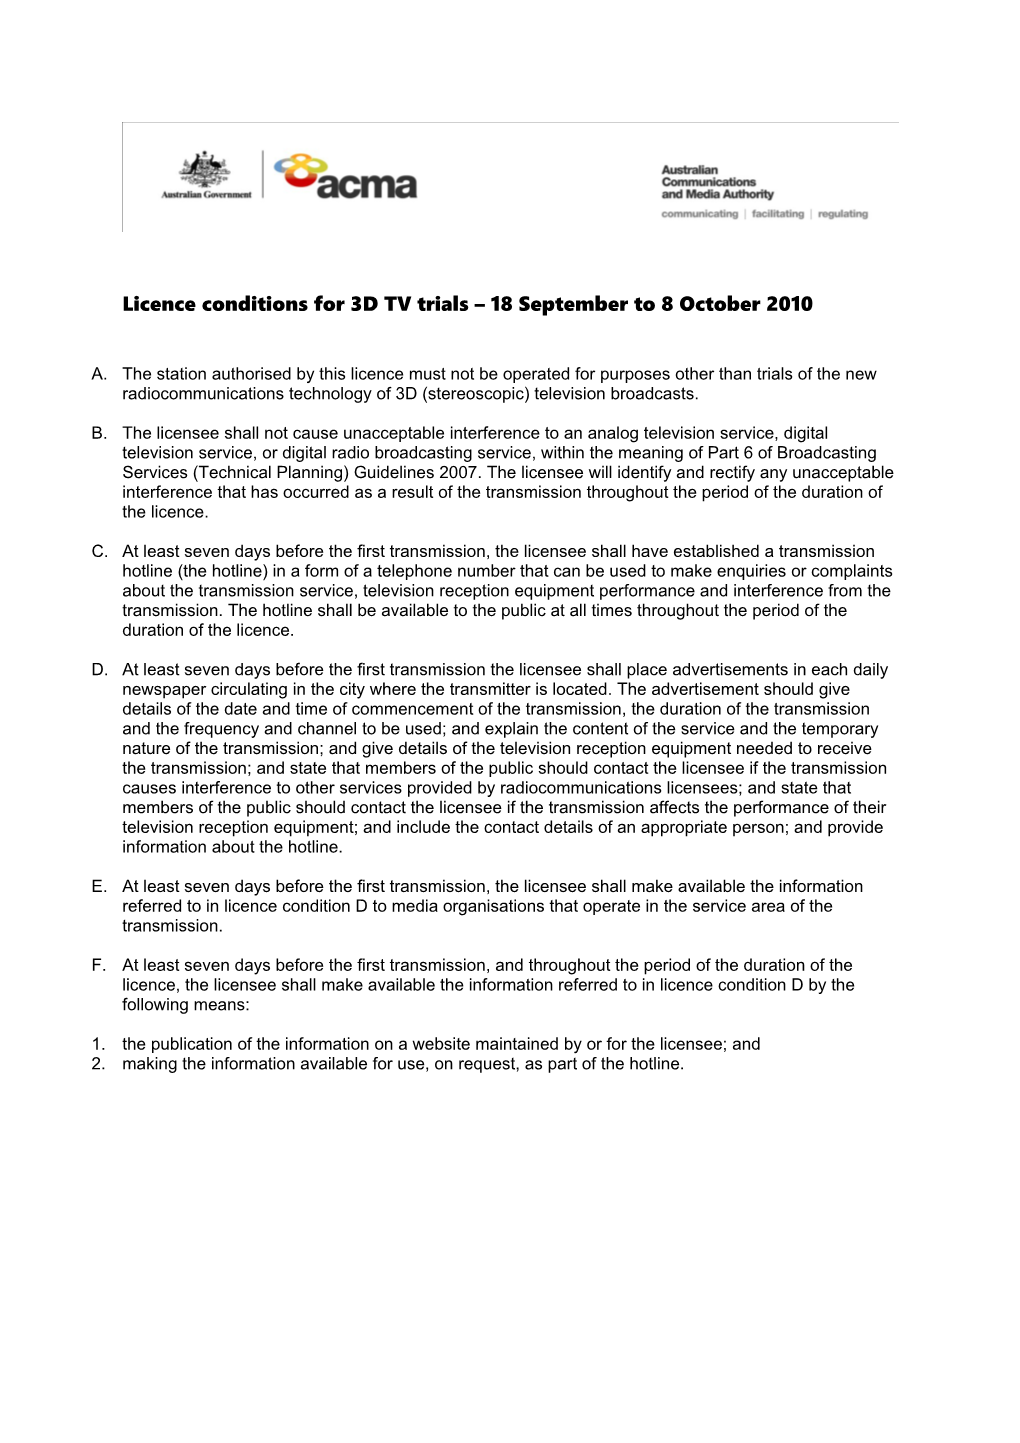 Licence Conditions for 3D TV Trials - 18 September to 8 October 2010